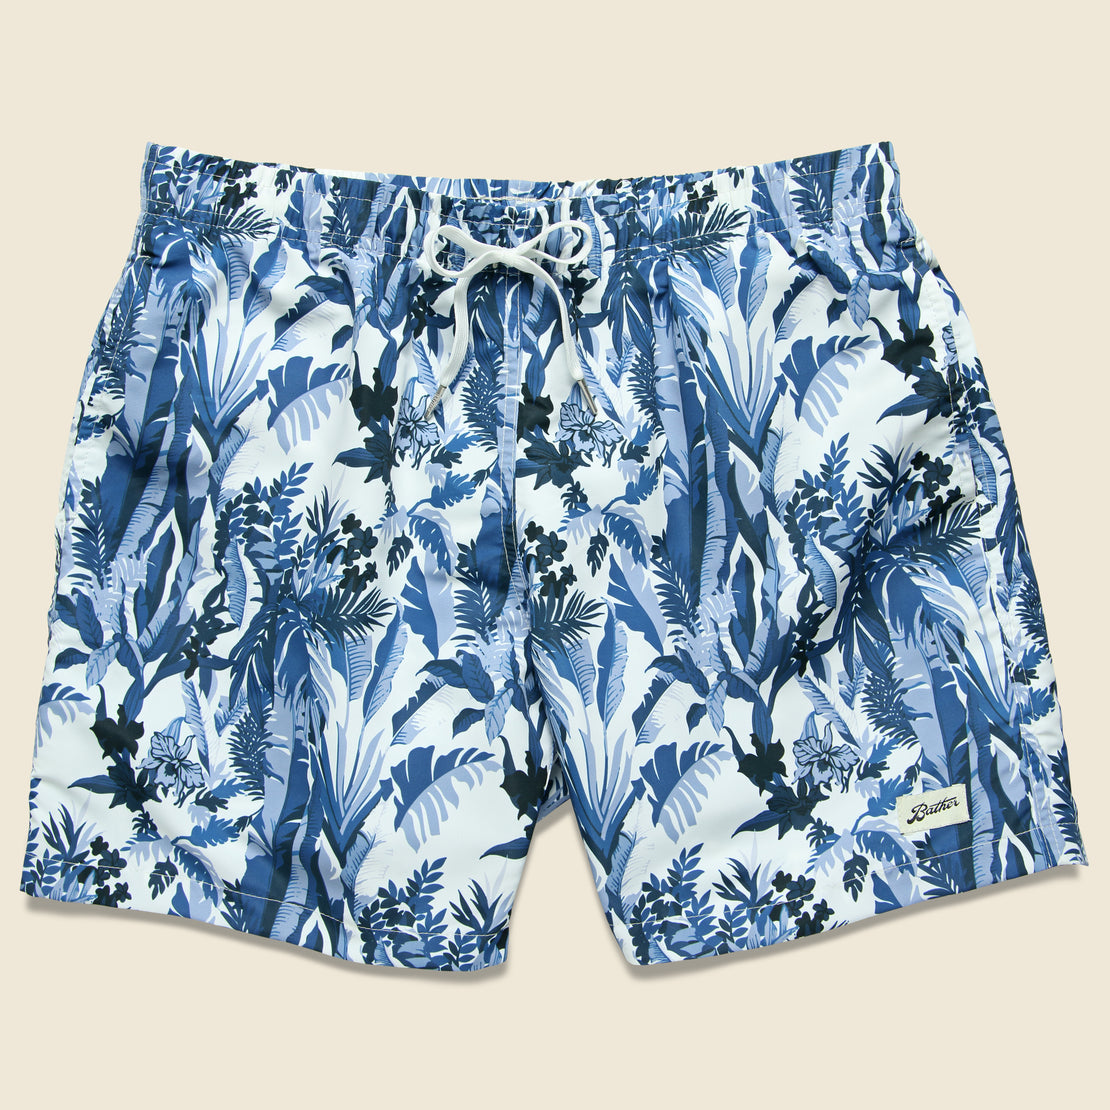 Bather Trunk Co. Tropical Forest Swim Trunk - Blue